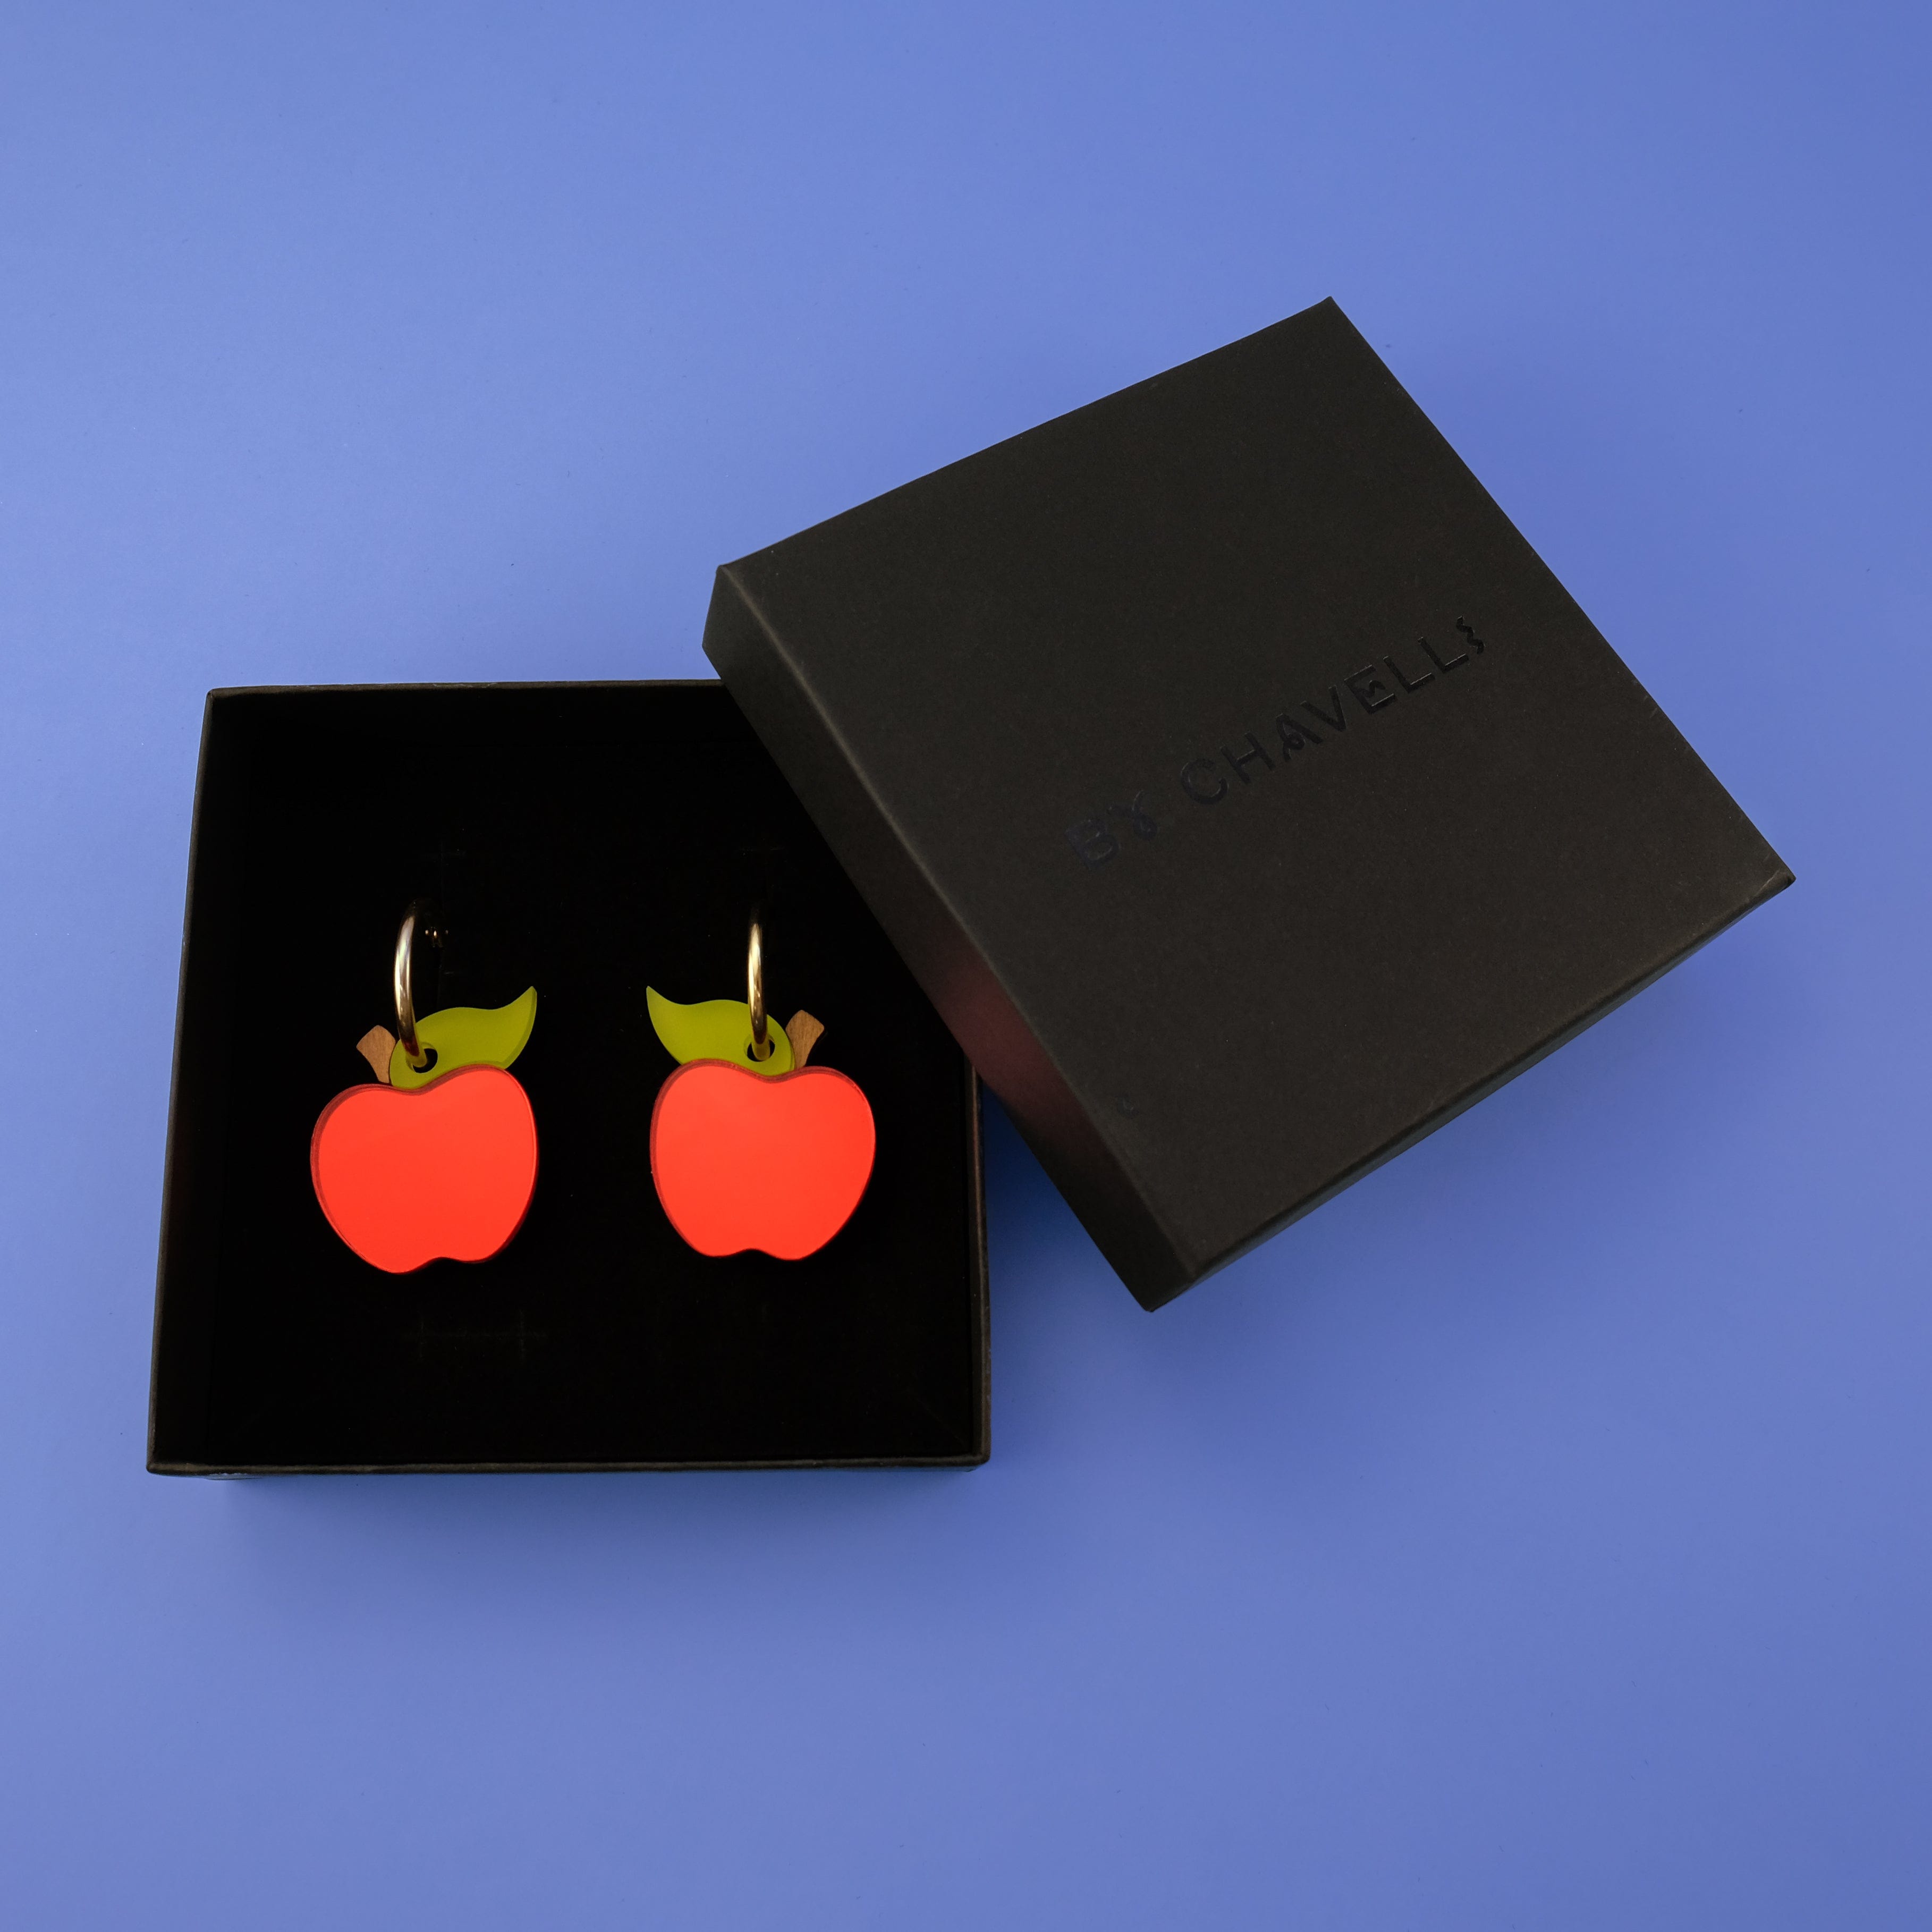 Cute lightweight apple earrings with gold-filled hoops